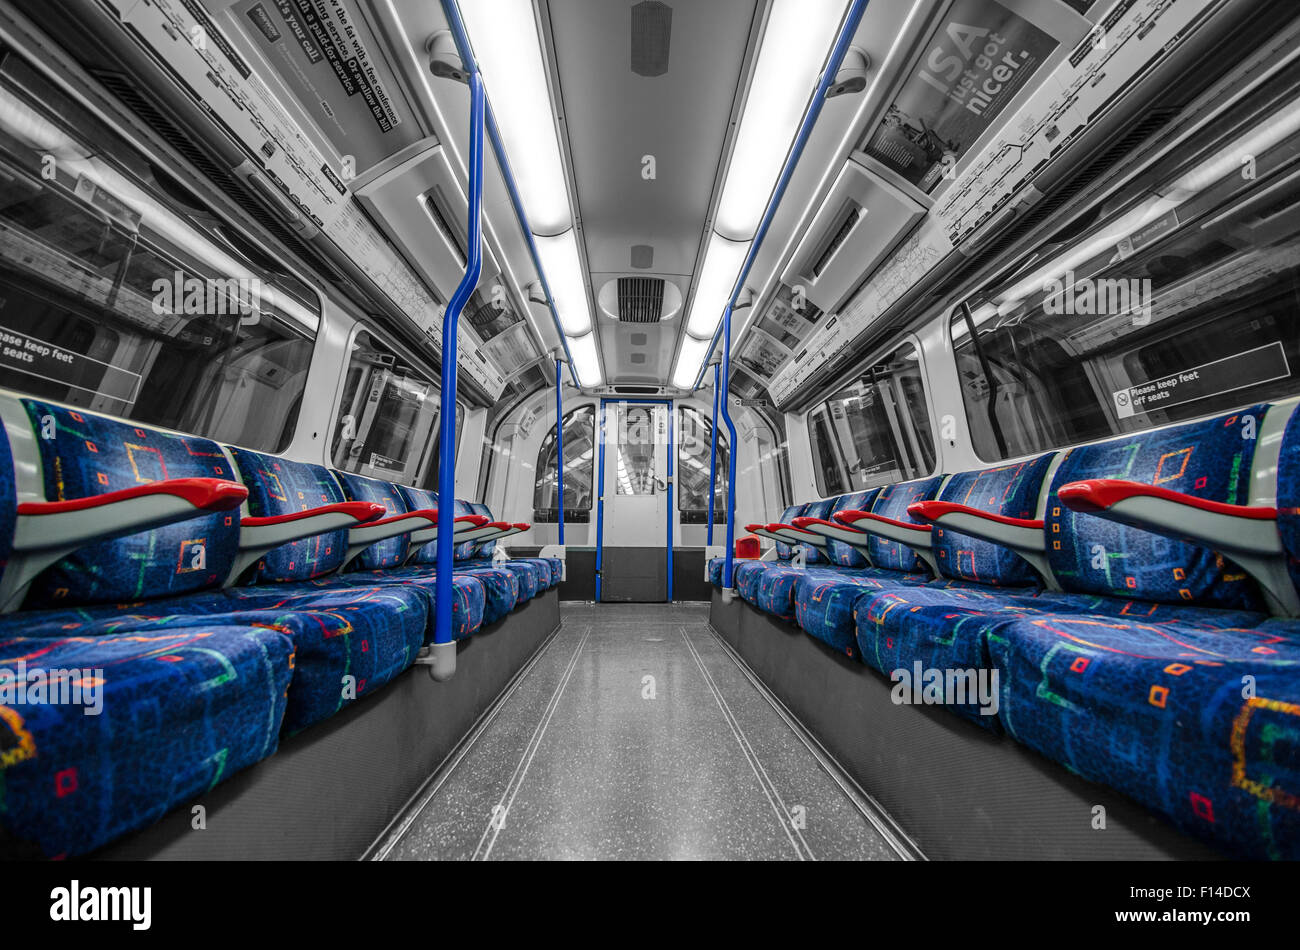 The subway of London with selective color highlighting some details. Stock Photo